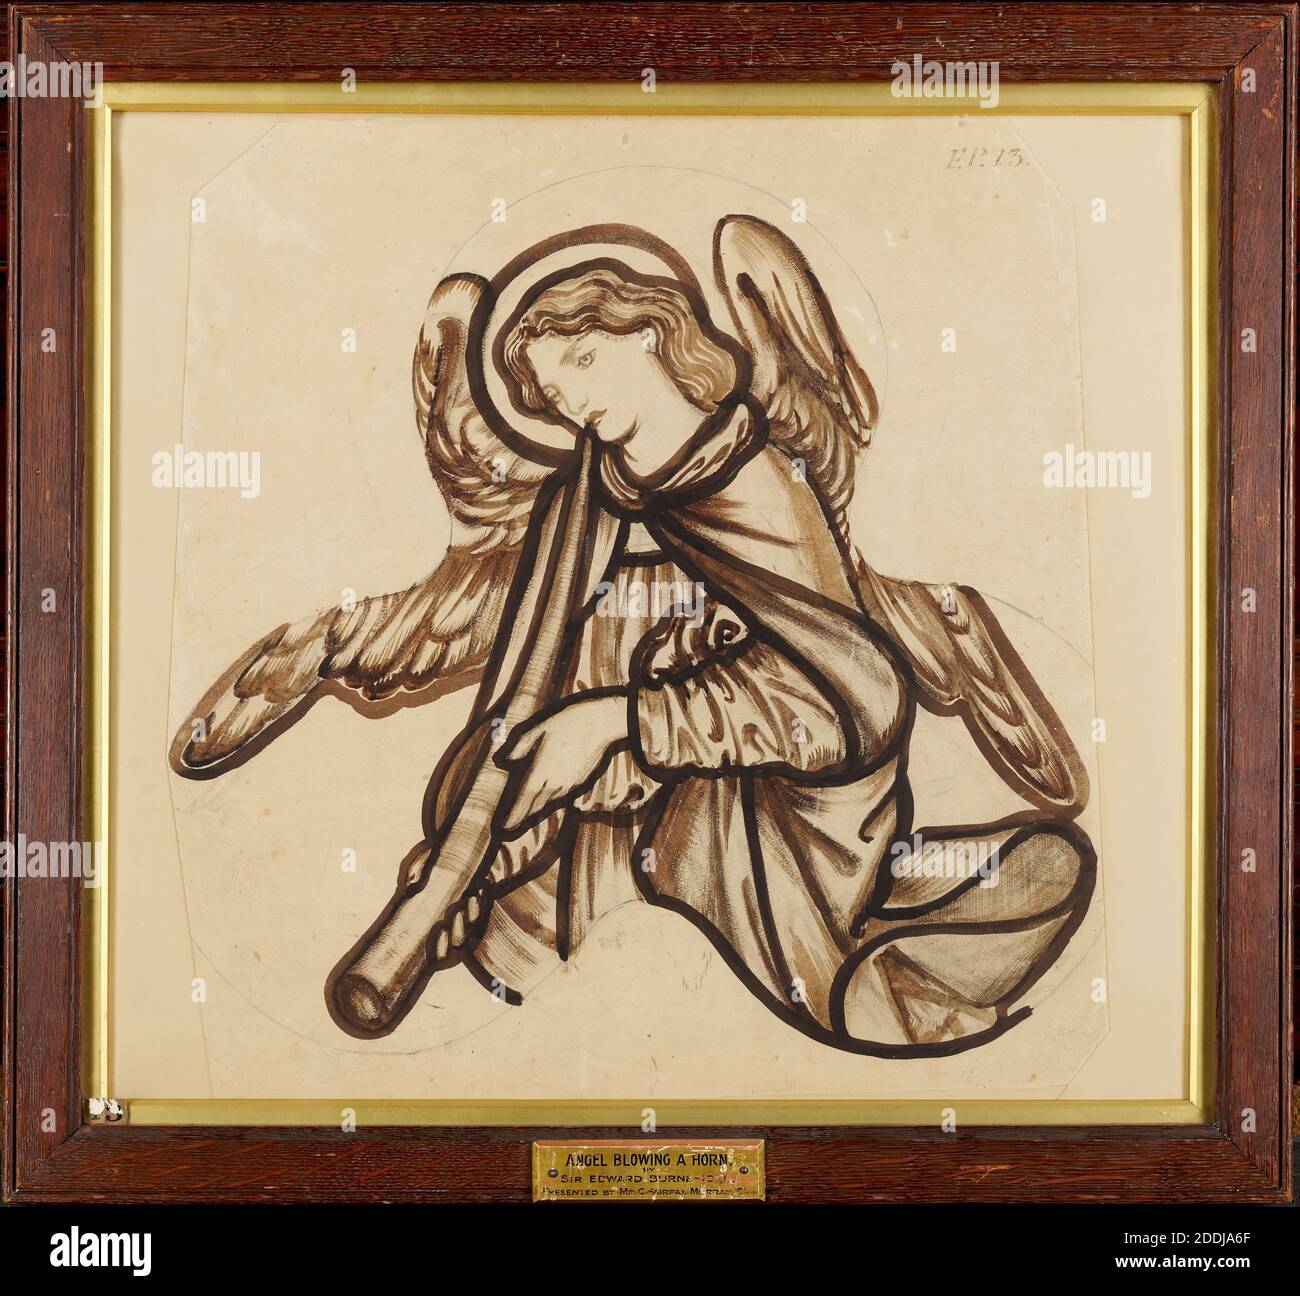 Angel Playing a Horn, 1862-3 Sir Edward Burne-Jones (d.1898), Design for St Michael and All Angels Church, Lyndhurst, New Forest, Art Movement, Pre-Raphaelite, Ink, Musical instrument, Angel, Design, Mixed media, Trefoil, Wash drawing, Unfinished, Works on Paper Stock Photo